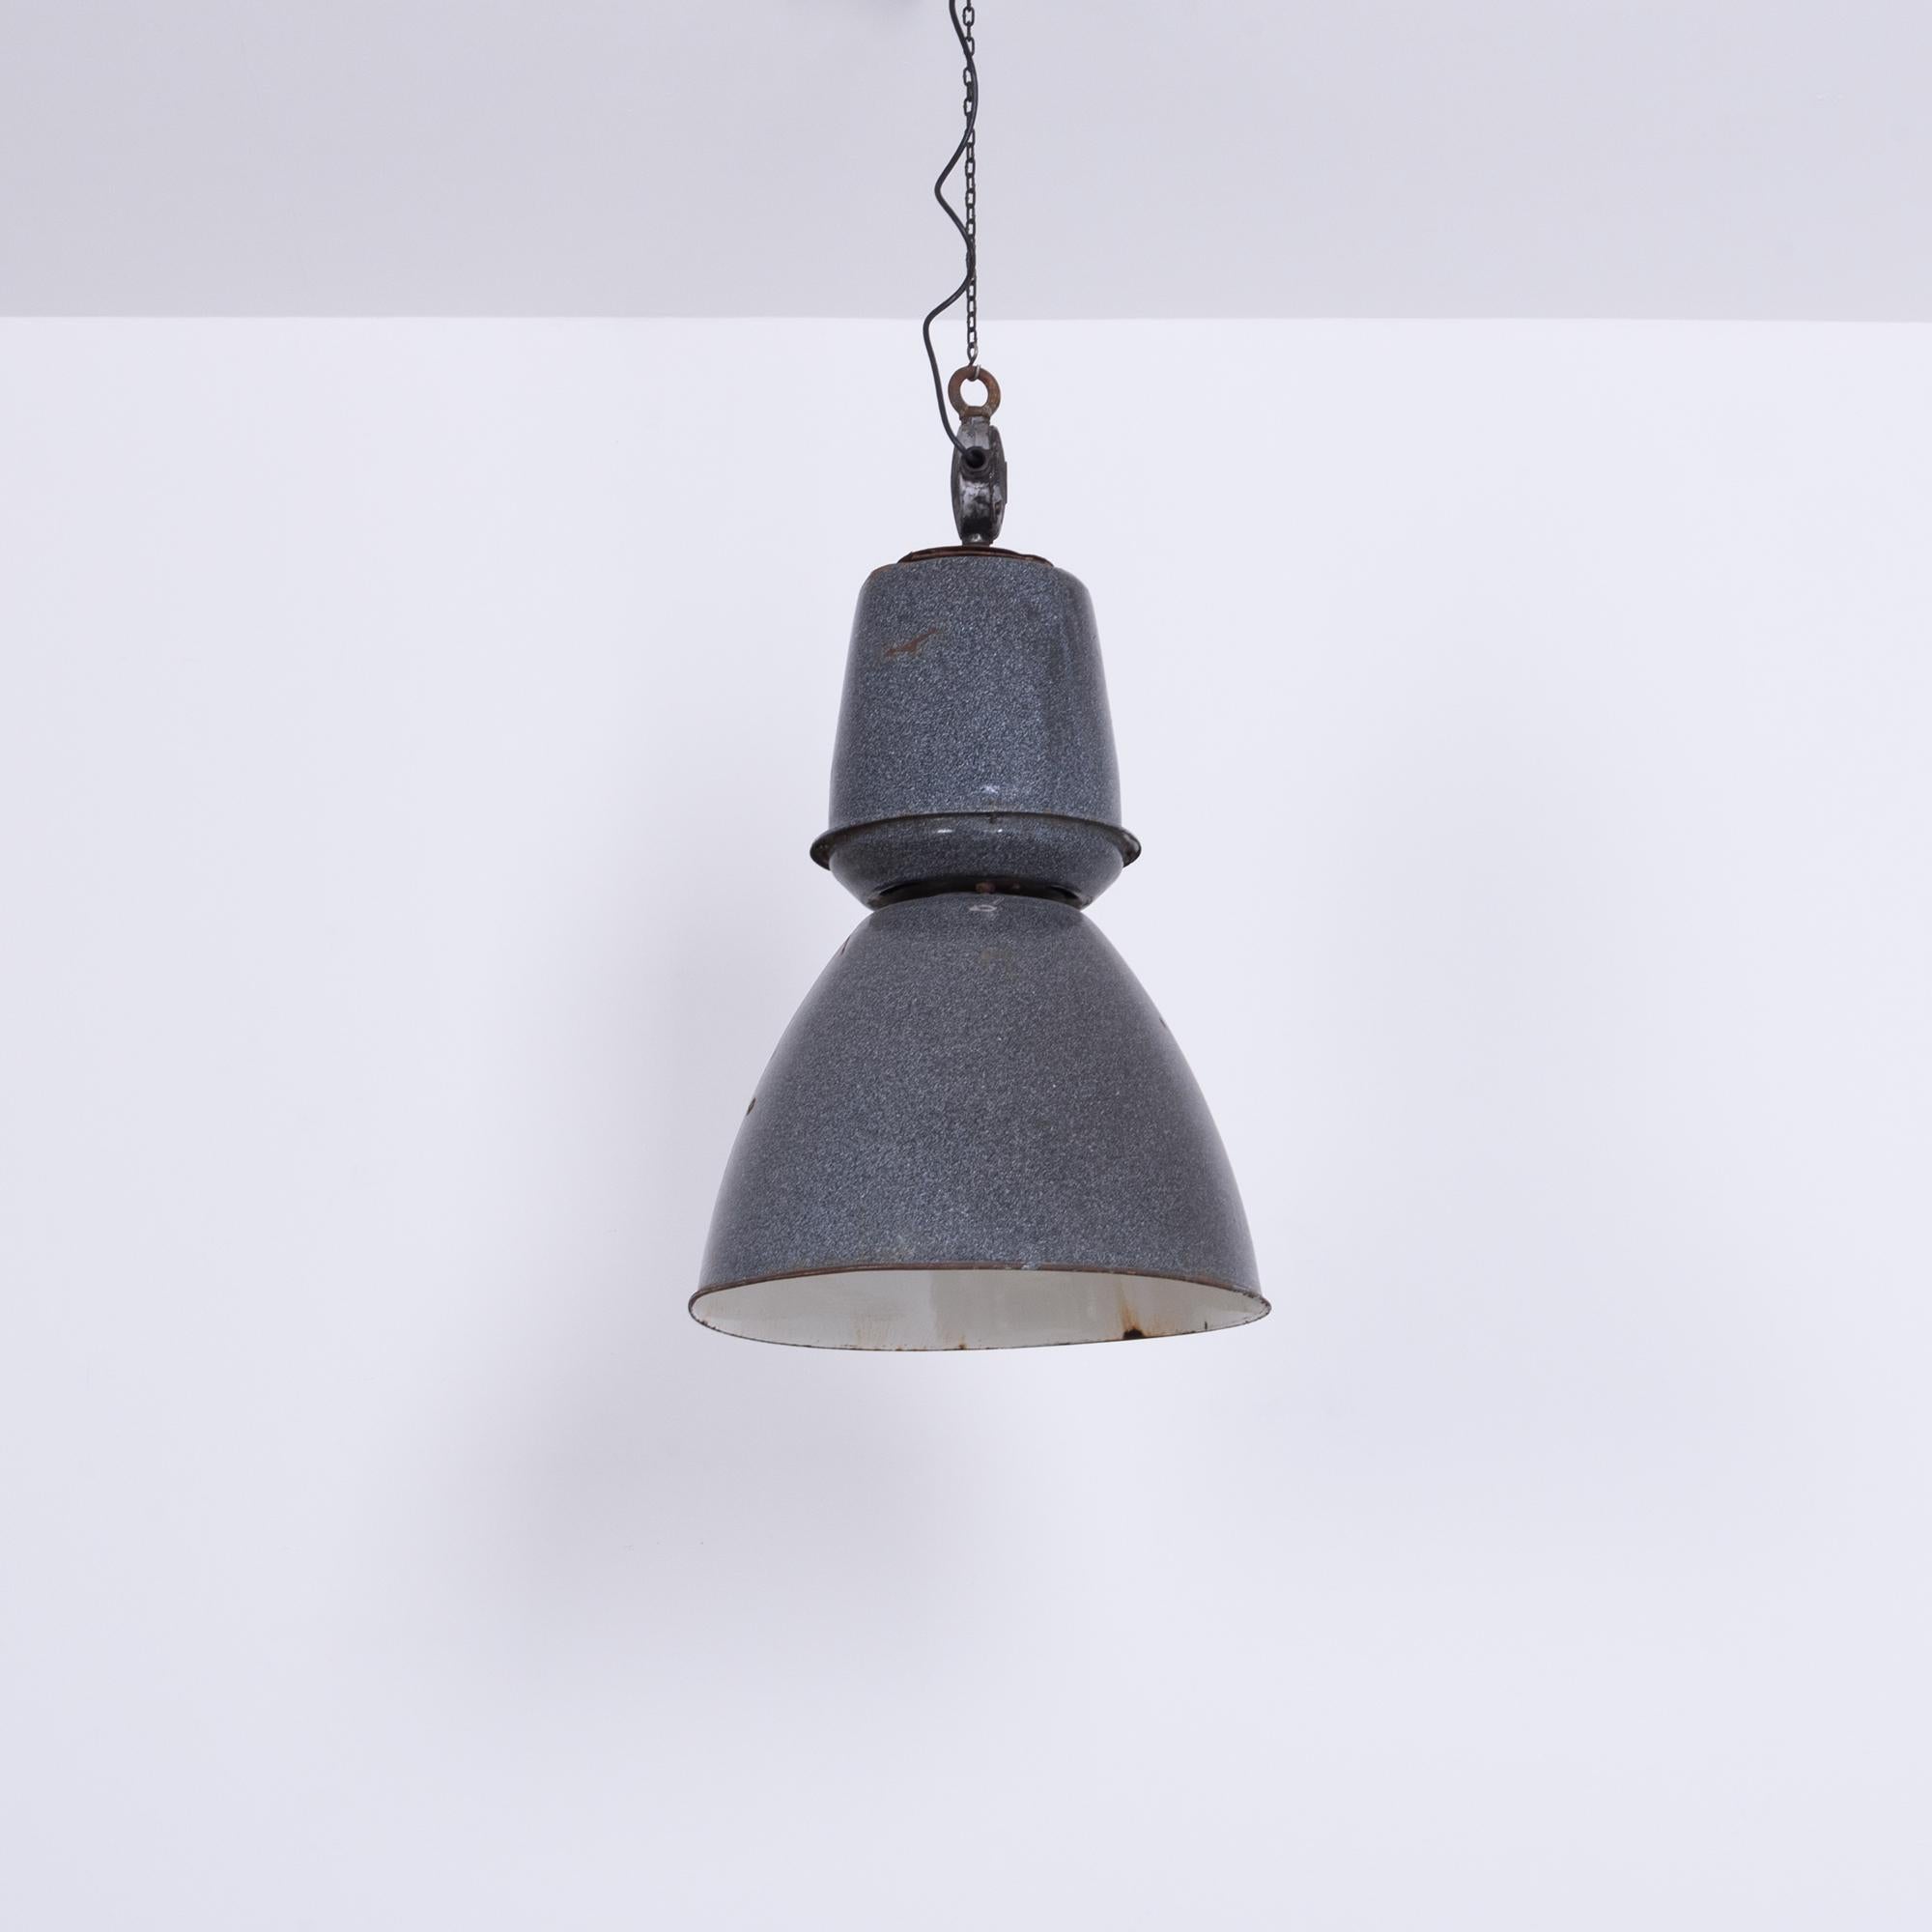 Channeling the essence of industrial charm, this Metal Pendant Lamp is a stellar example of functional design transformed into art. Dating back to the mid-20th century, its robust form was undoubtedly intended for a life amidst the hustle and bustle